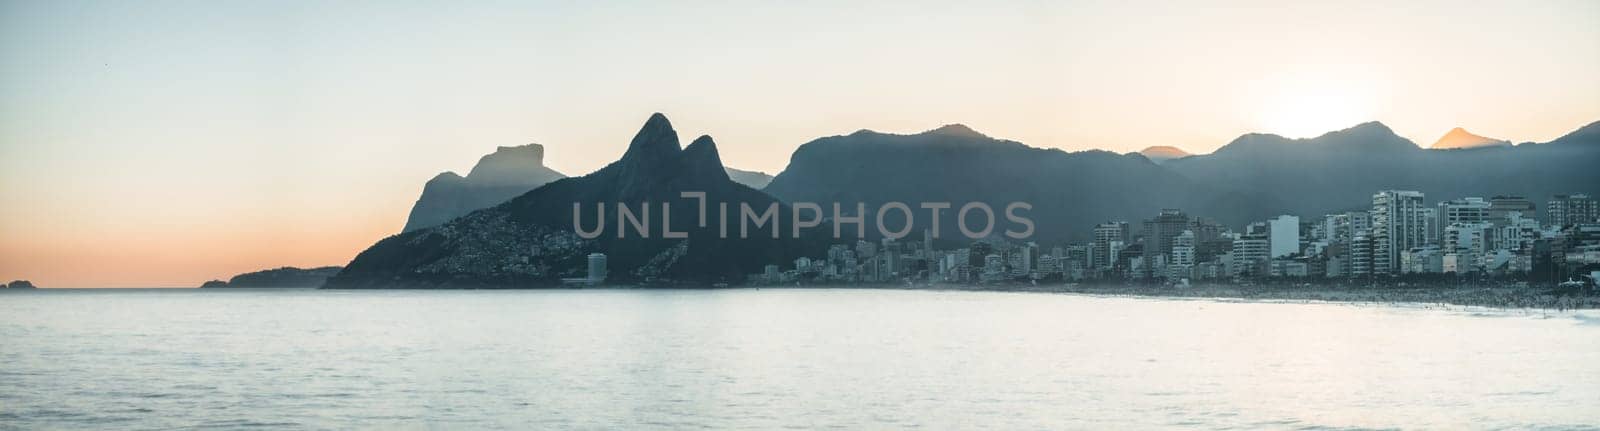 Mystic Sunset Over Ipanema Beach with Favelas and Mountain Silhouettes by FerradalFCG